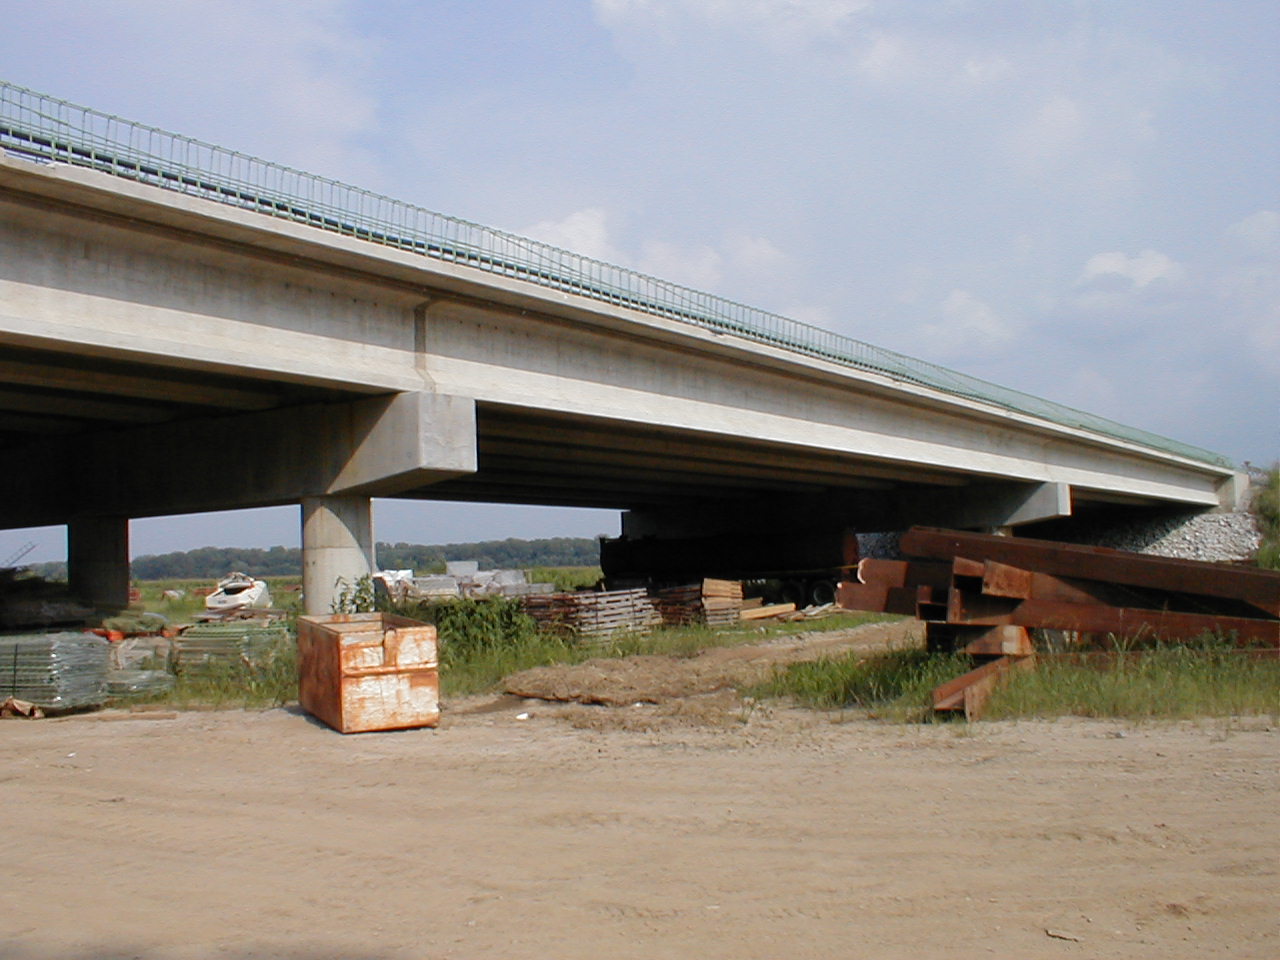 The barrier along the south approach of the bridge is still under construction.